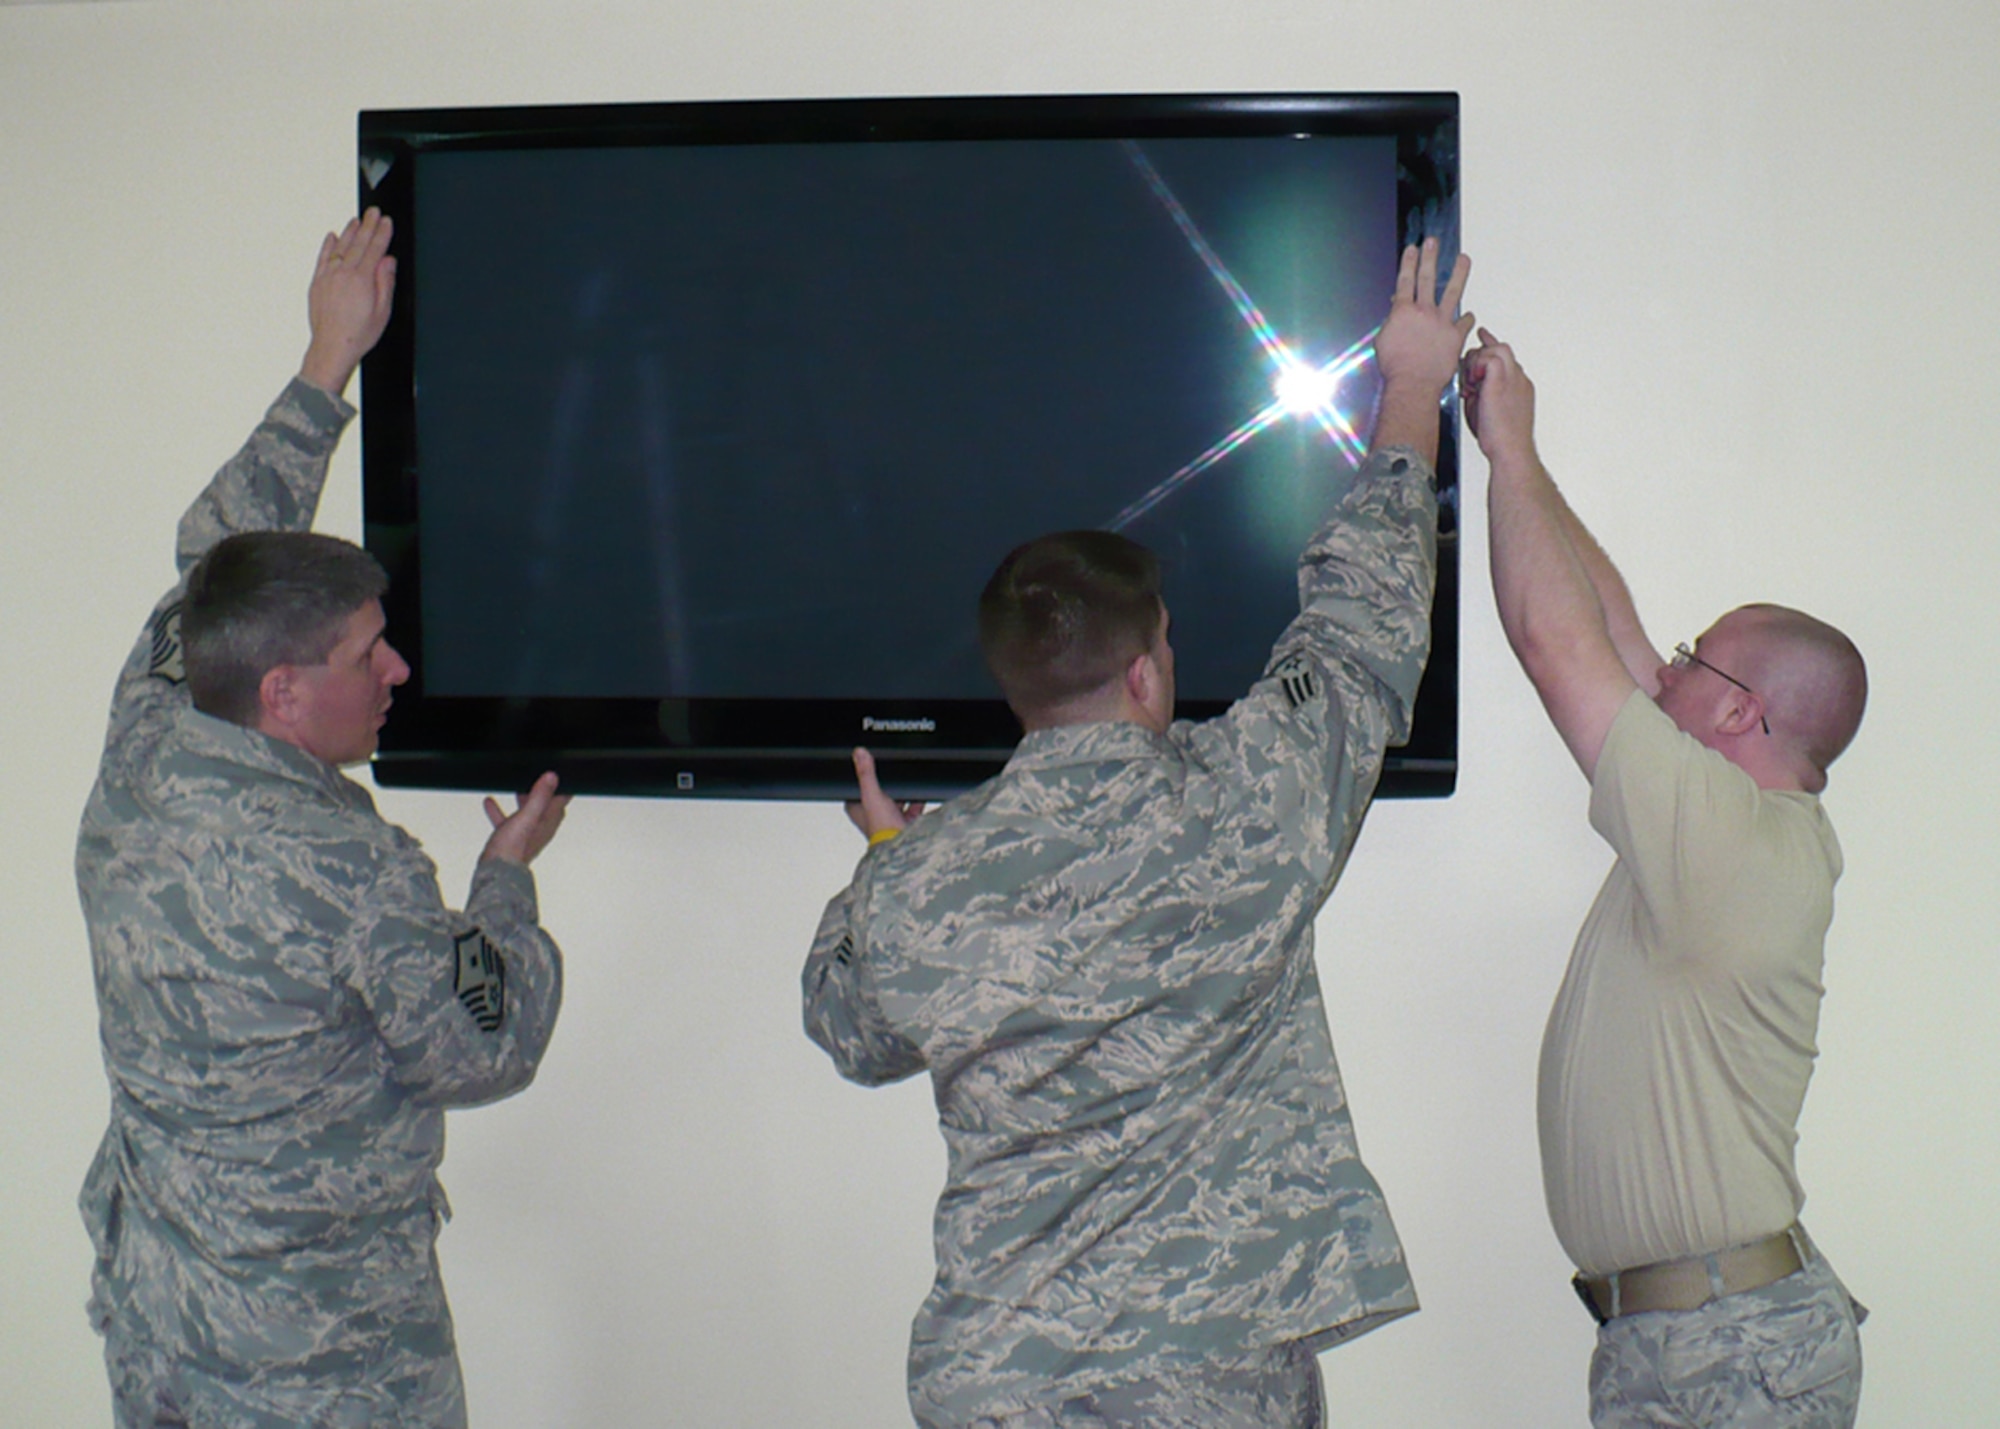 KADENA AIR BASE, Japan -- Master Sgt. Michael Frazier (left), 353rd Maintenance Squadron first sergeant, Senior Airman Brian Schutz (center), 353rd MXS, and Airman 1st Class Joshua Savage, 353rd Operations Support Squadron, hang a flat-screen television on the wall in the third floor dayroom of dormitory 758 here.  The dorm residents', who are predominately 353rd Special Operations Group and 18th Medical Group Airmen, won the base's last Dorm of the Quarter Award and the $2,000 that goes along with it. Before winning the competition, the residents were busy with several improvement projects that included the day rooms on the first three floors, and are in the process of renovating the fourth floor dayroom. (Courtesy photo)